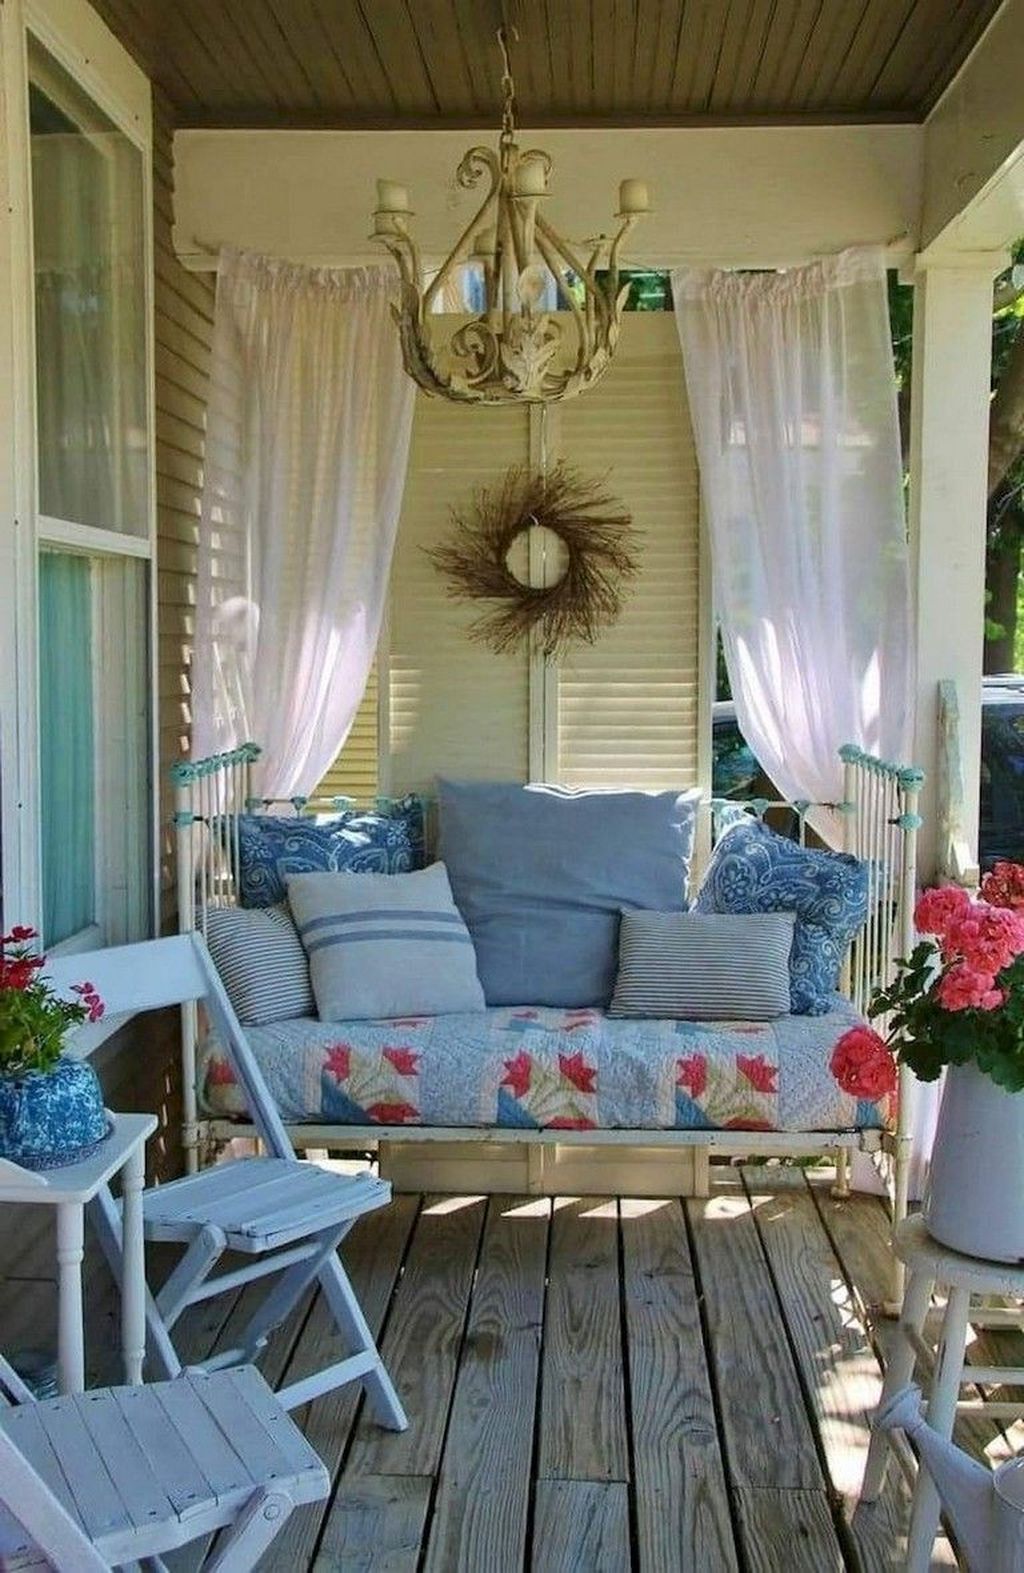 The Best Front Porch Ideas For Summer Decorating 20 - MAGZHOUSE